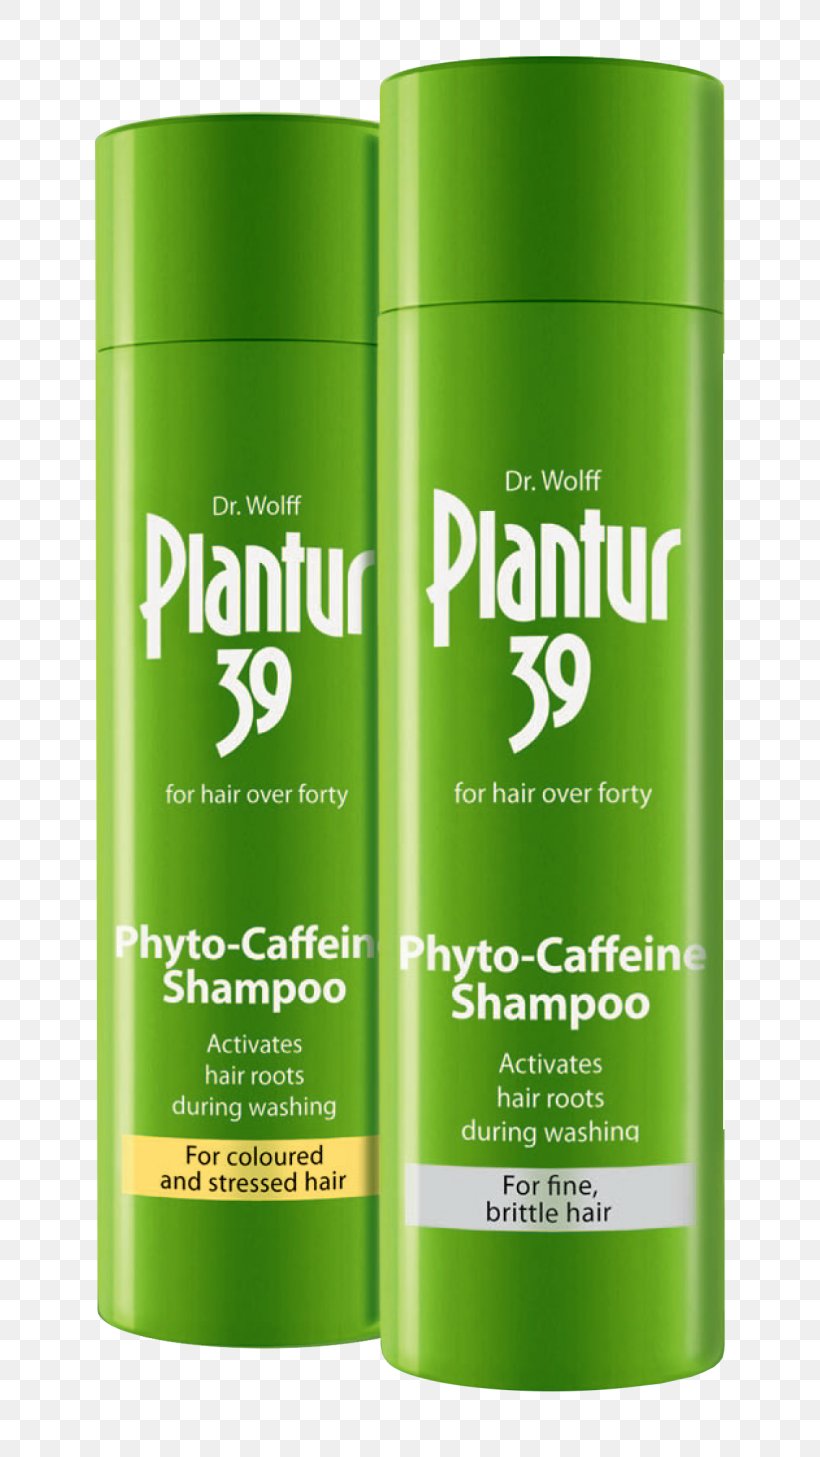 Management Of Hair Loss Plantur 39 Caffeine Shampoo Dr. Wolff Group, PNG, 768x1457px, Hair Loss, Clear, Cosmetics, Cosmetologist, Dr Wolff Group Download Free